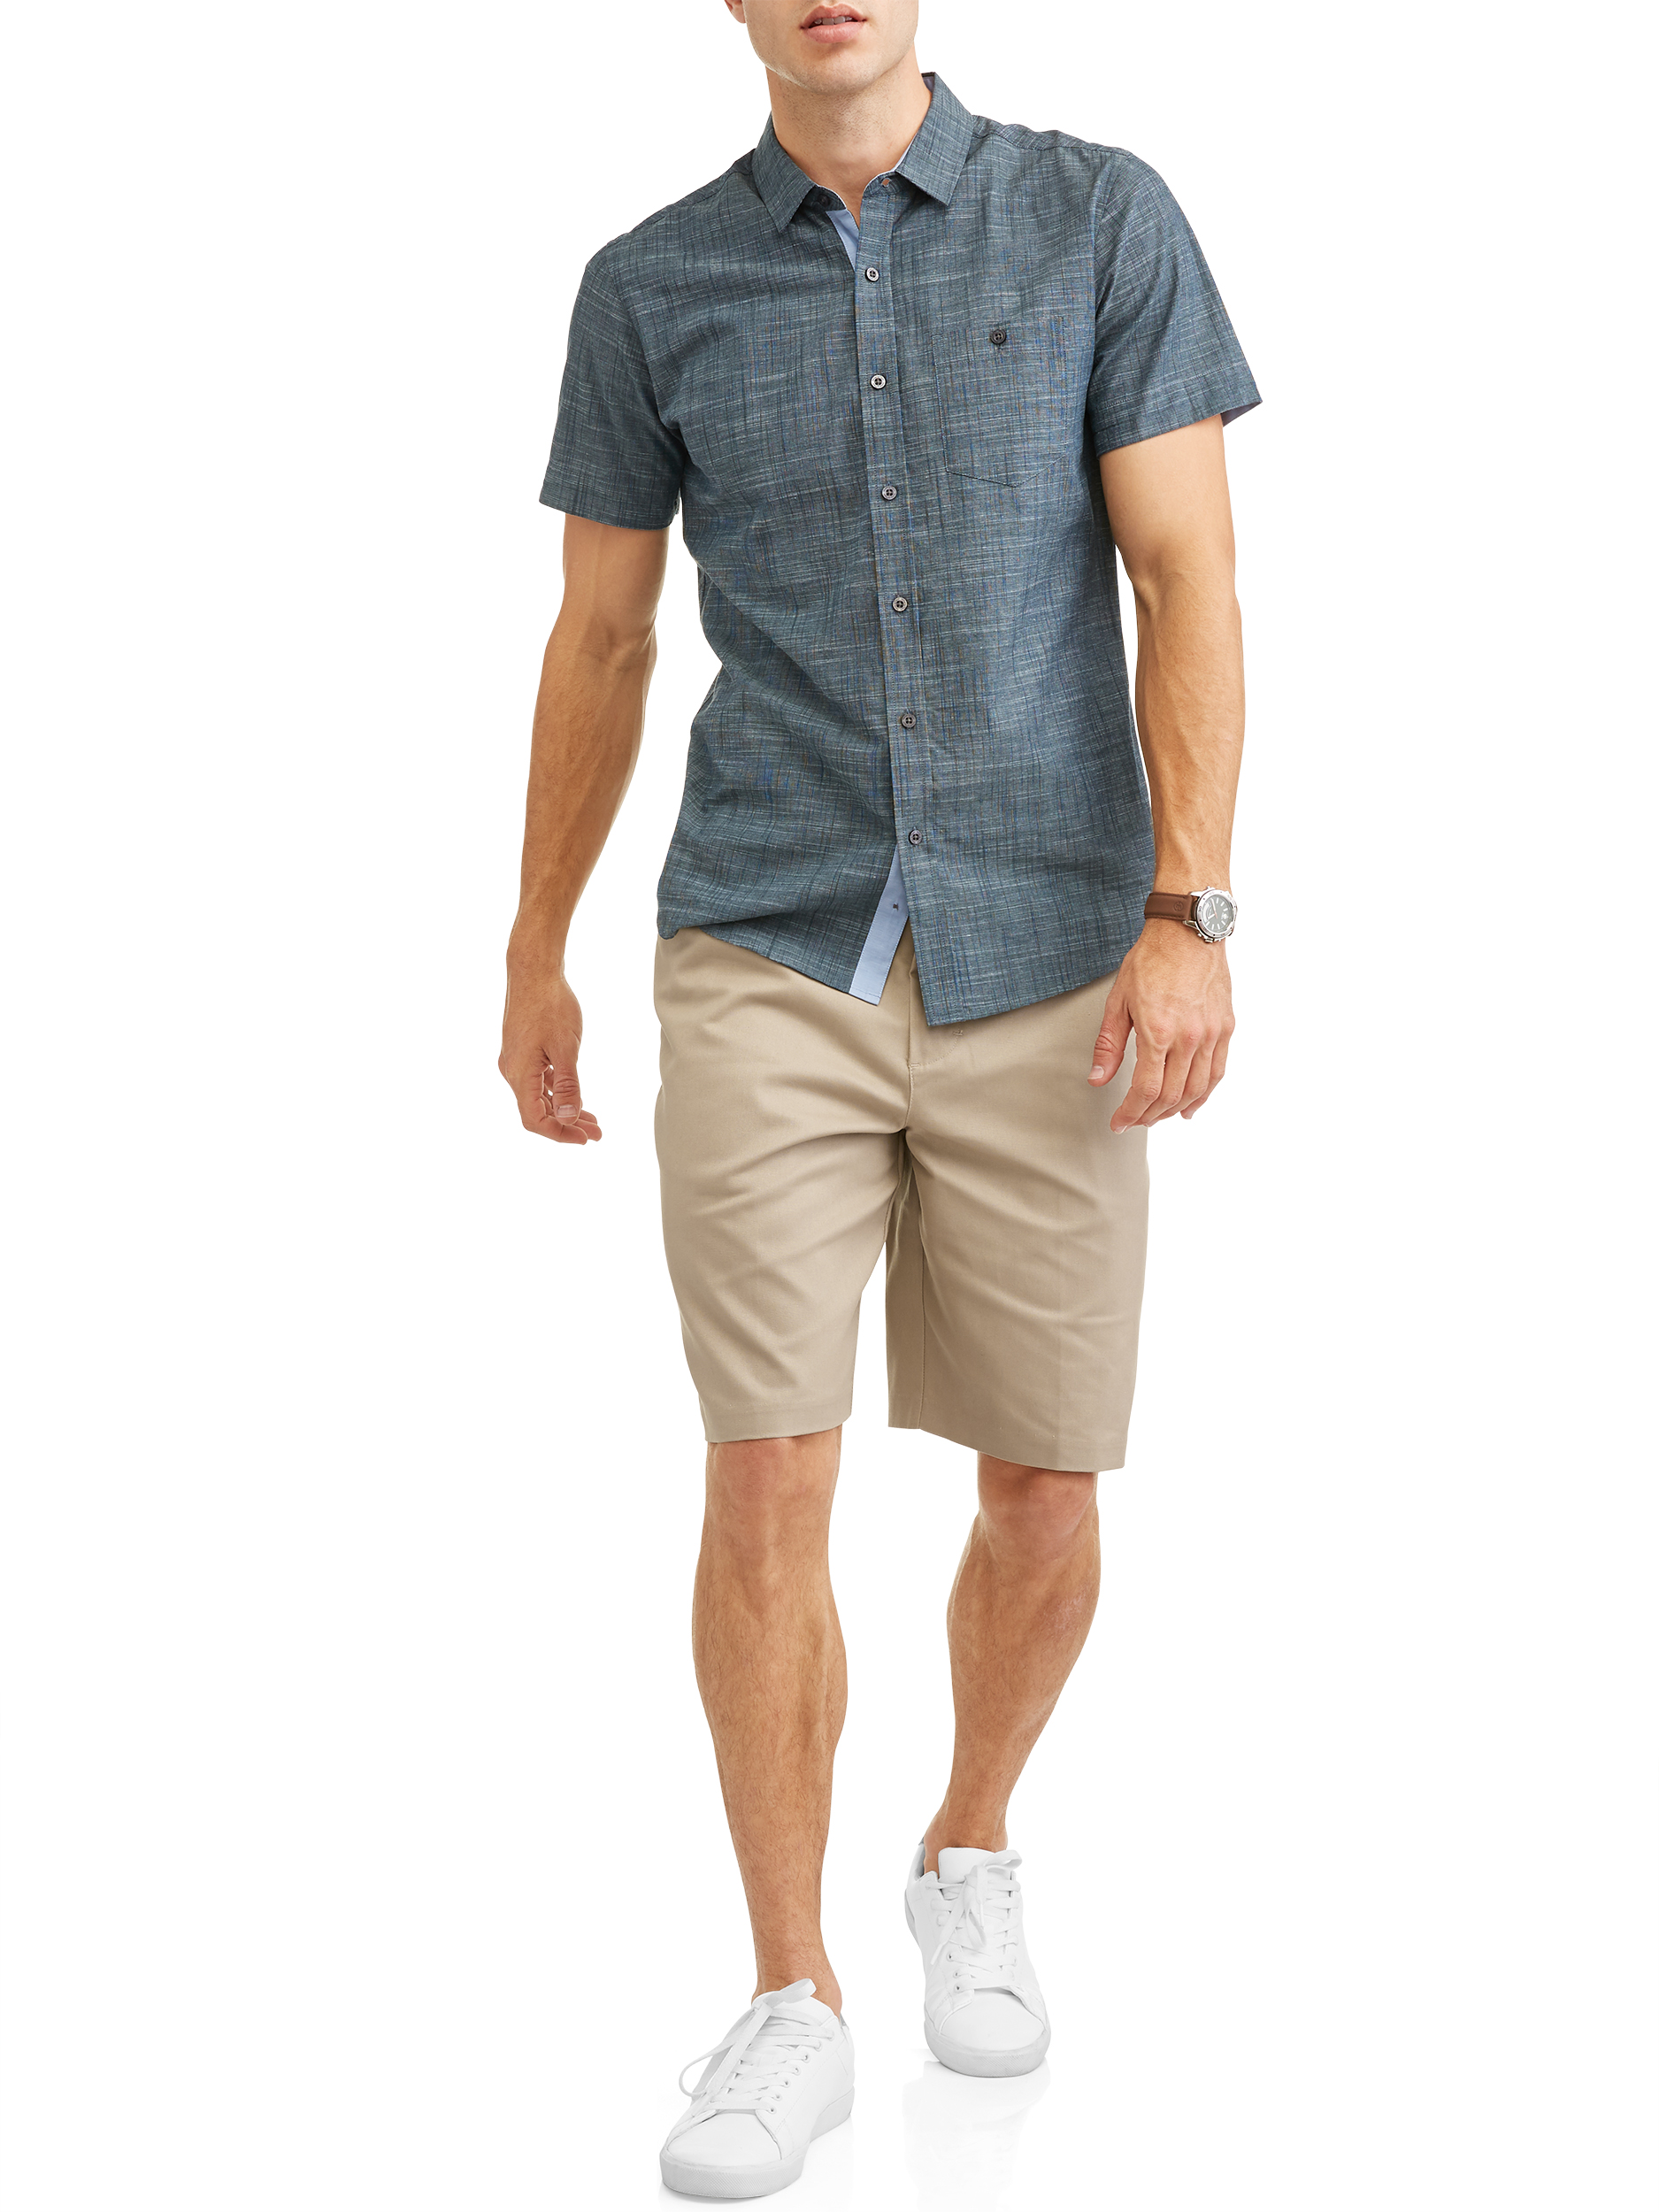 Real School Young Men's 10" Flat Front Short - image 3 of 4